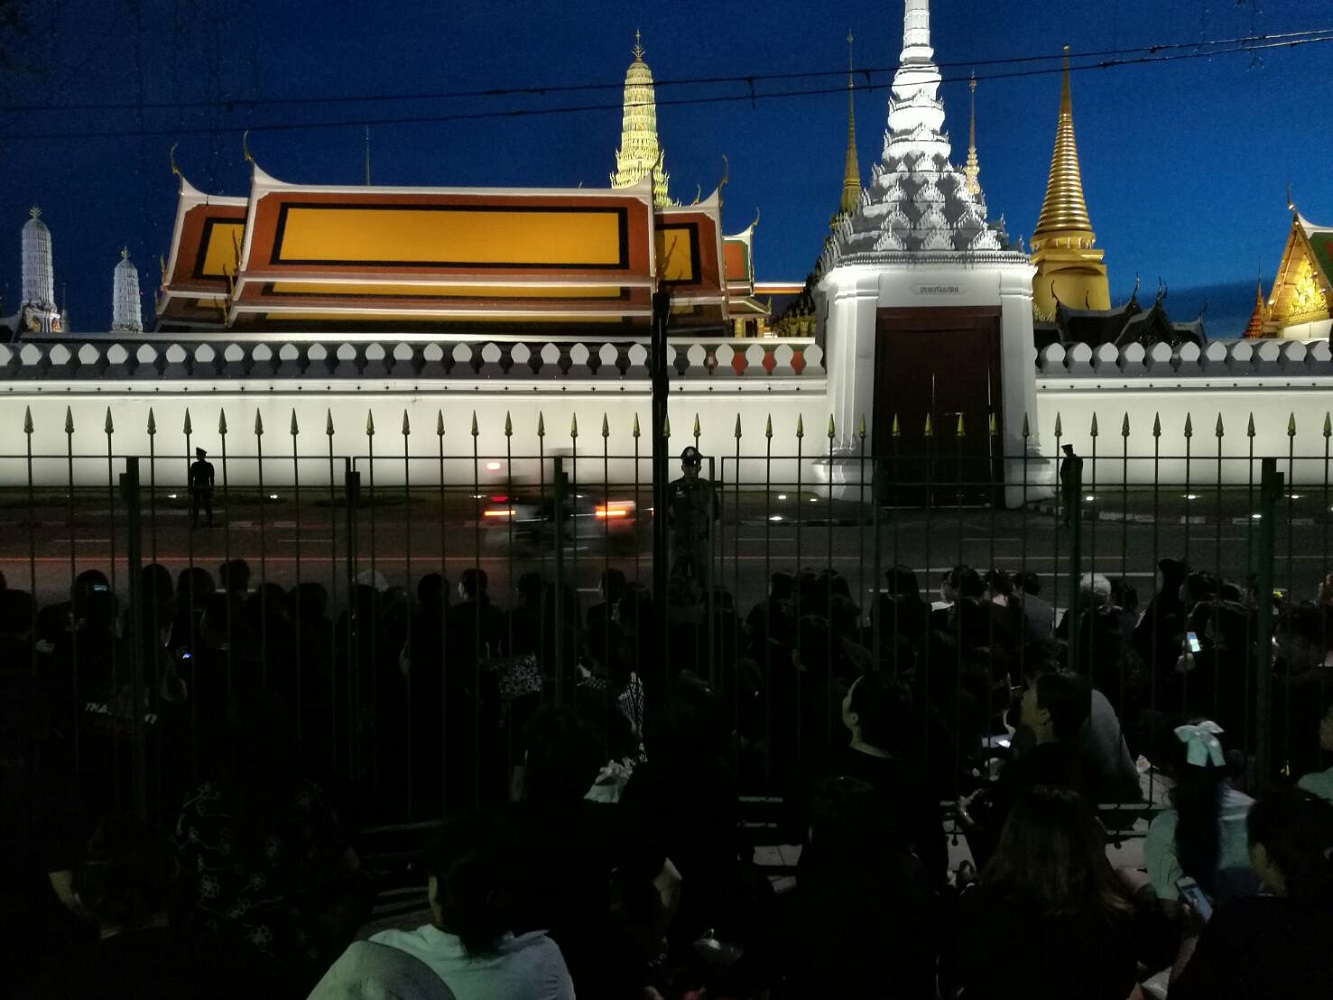 View toward Wat Phra Kaew inside the grounds of the Grand Palace in Bangkok on Thursday.